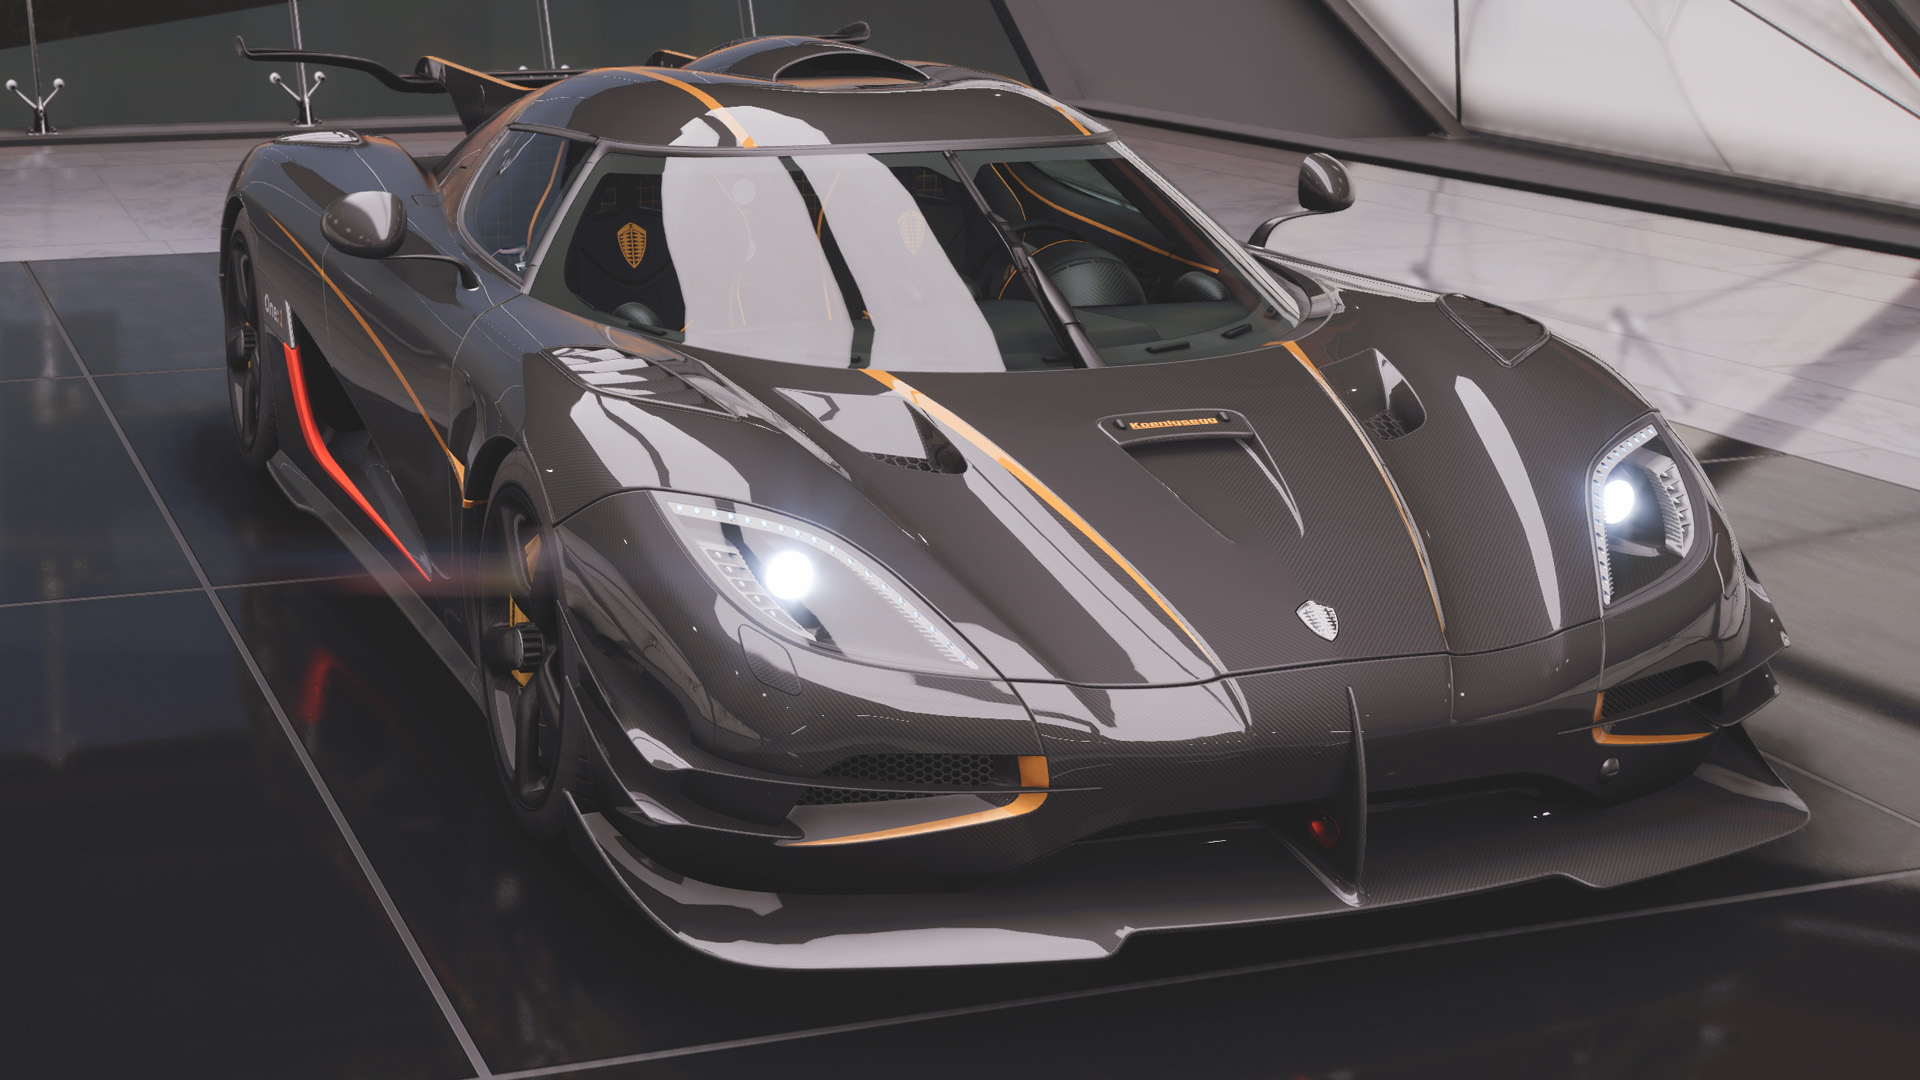 The fastest cars in Forza Horizon 5